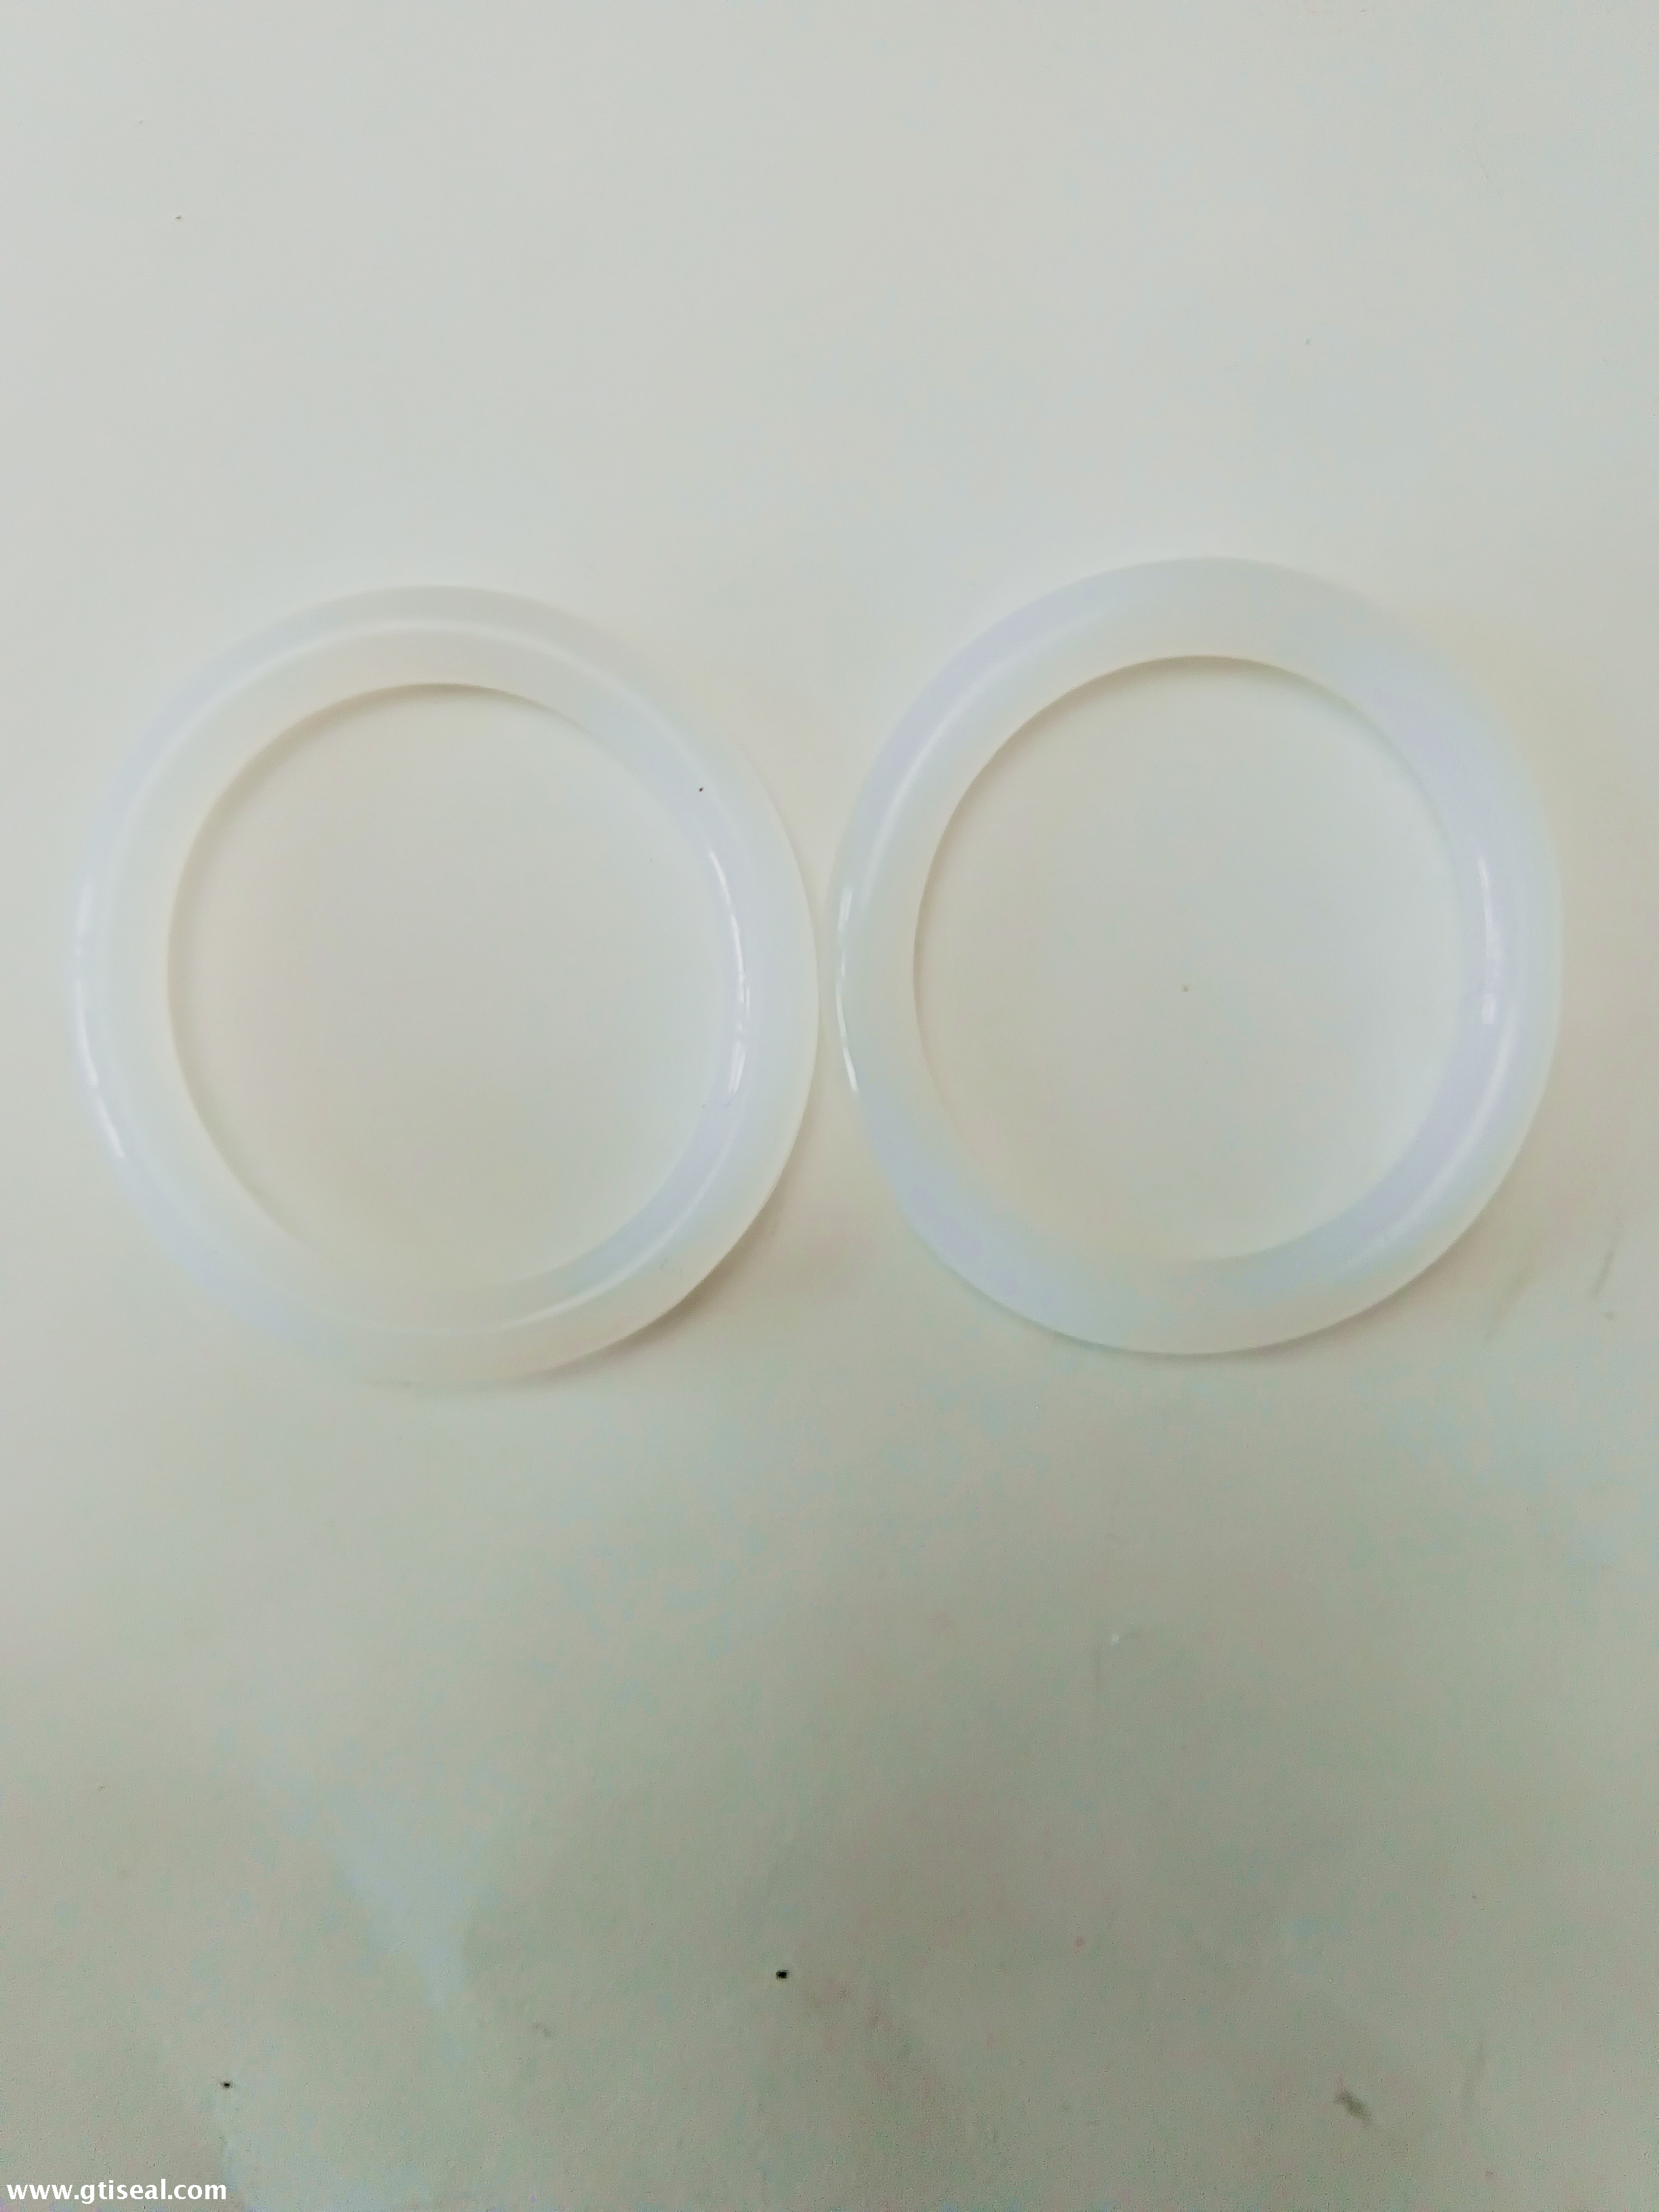  various size colorful NBR sealing rubber o ring 